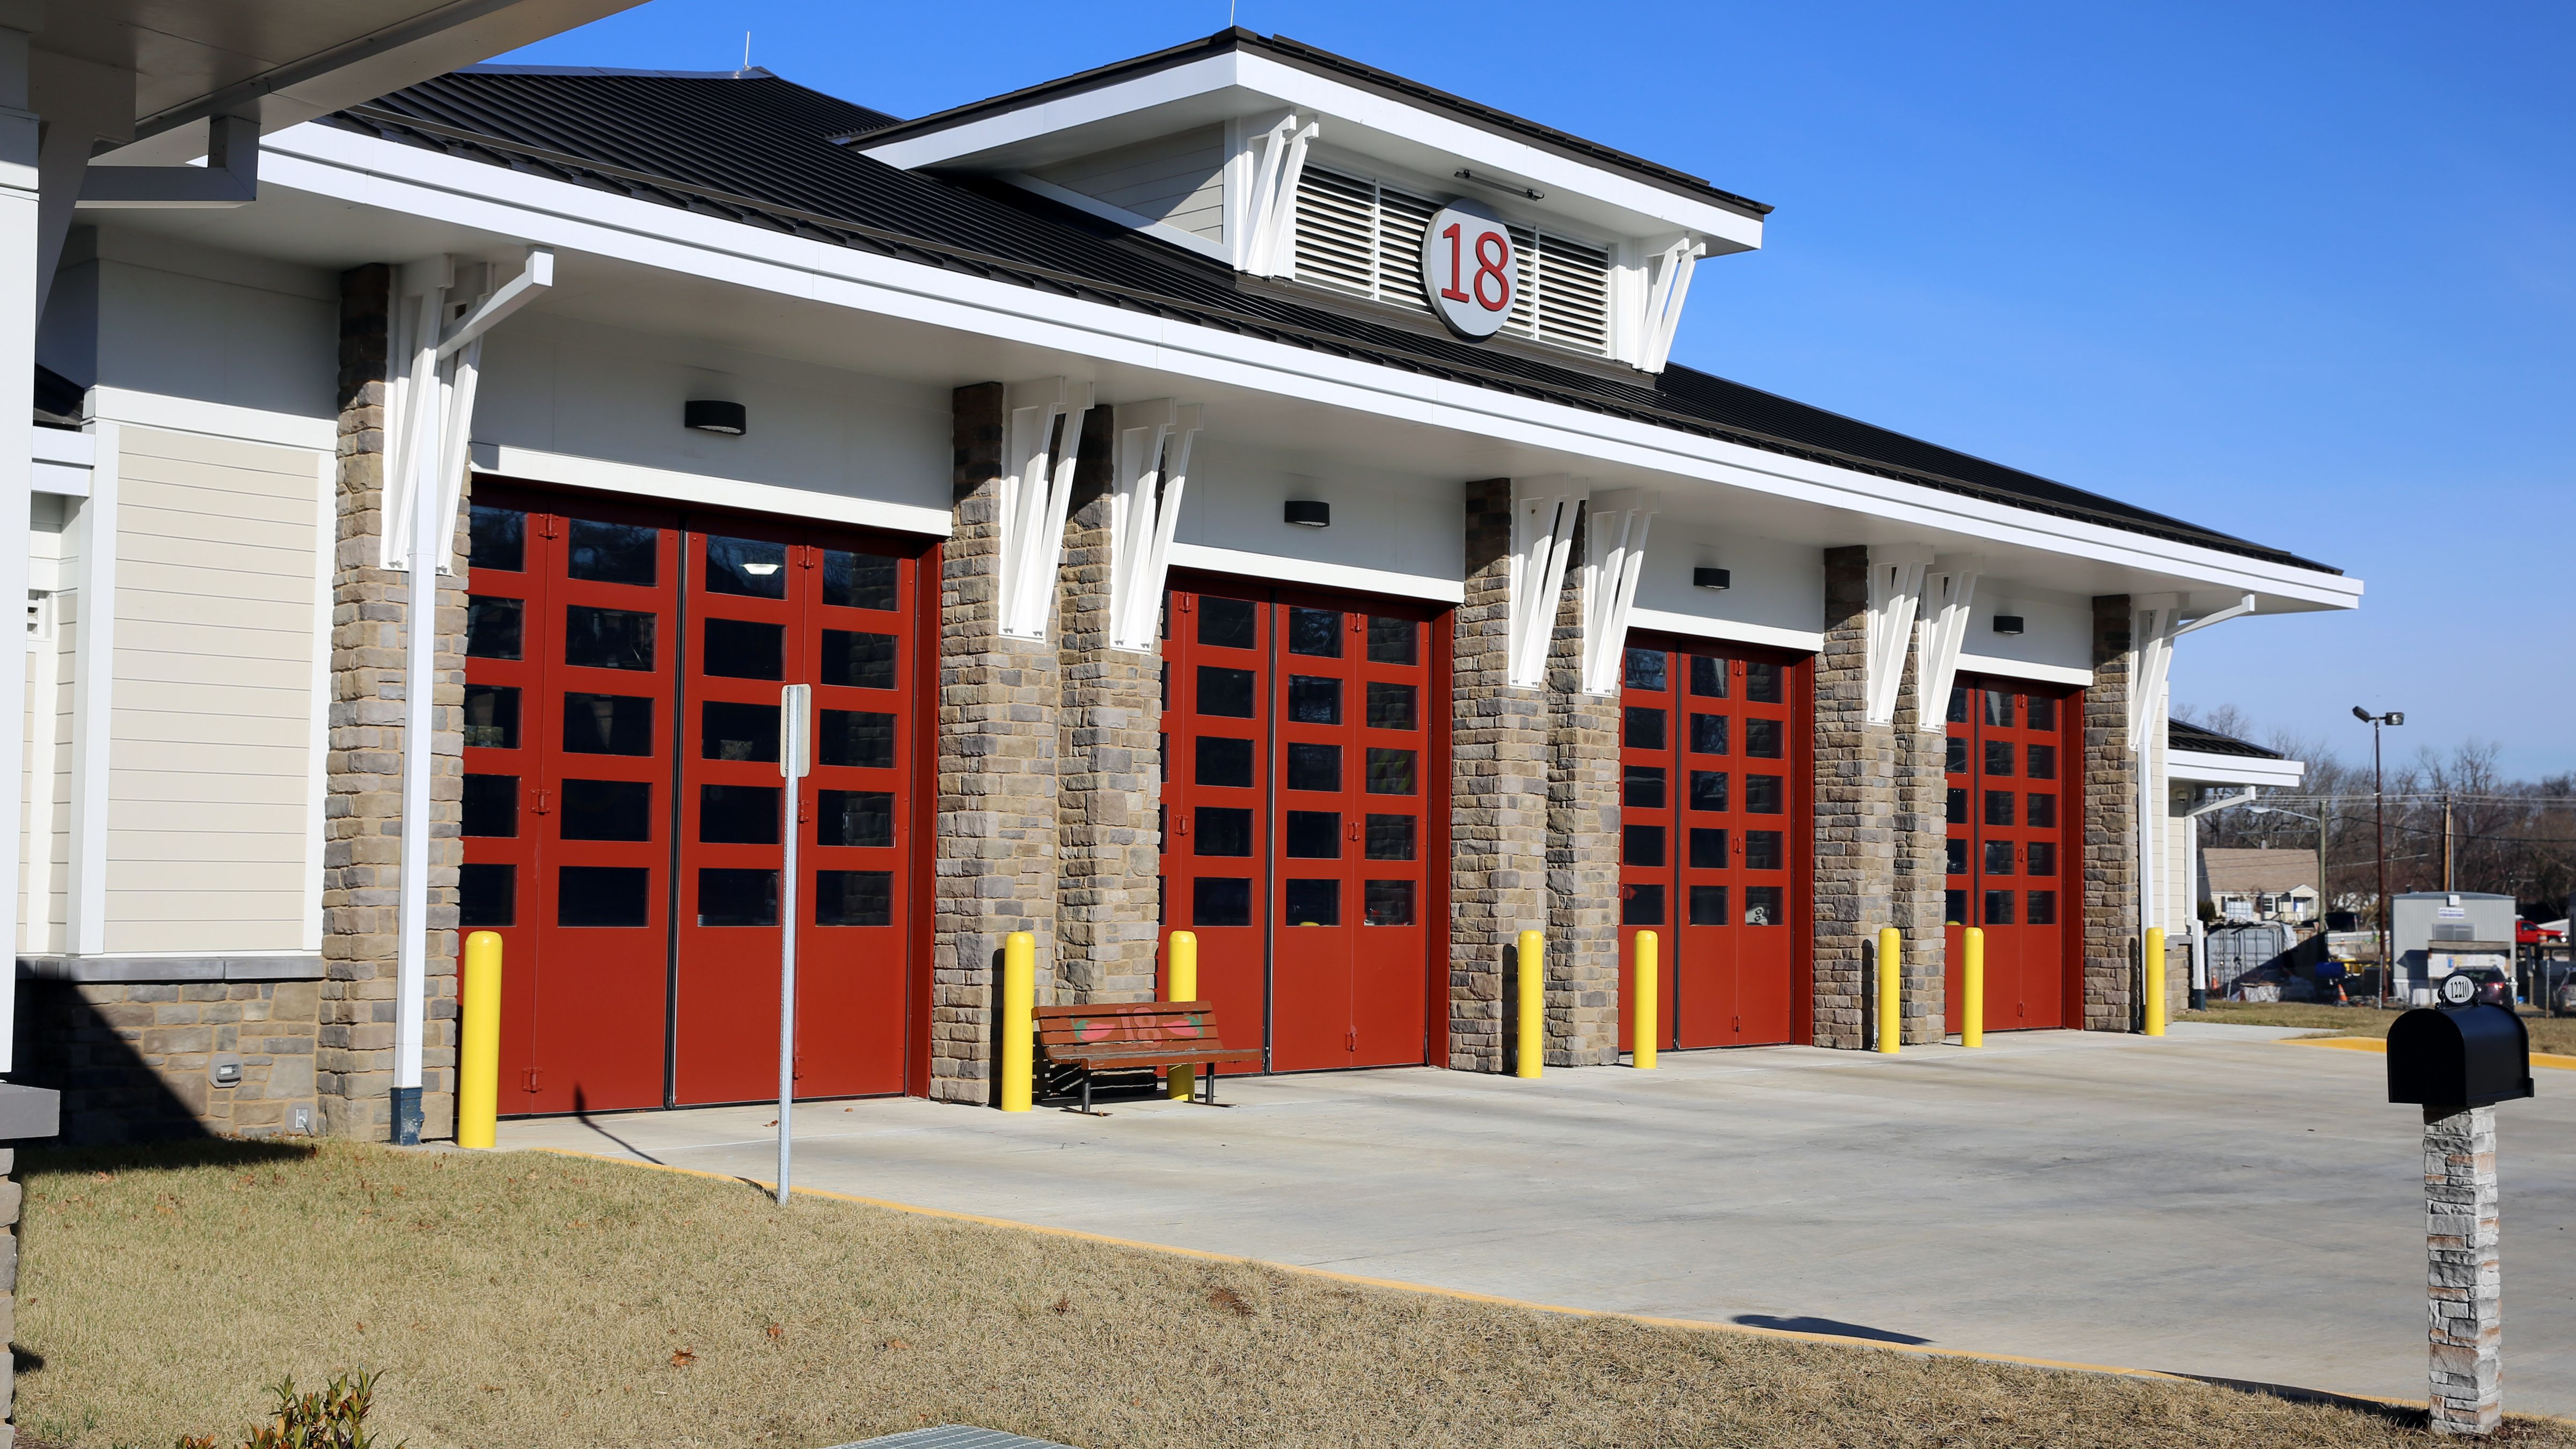 Four Fold Fire Station Doors Installed Overhead Door Company Of intended for proportions 4800 X 2700